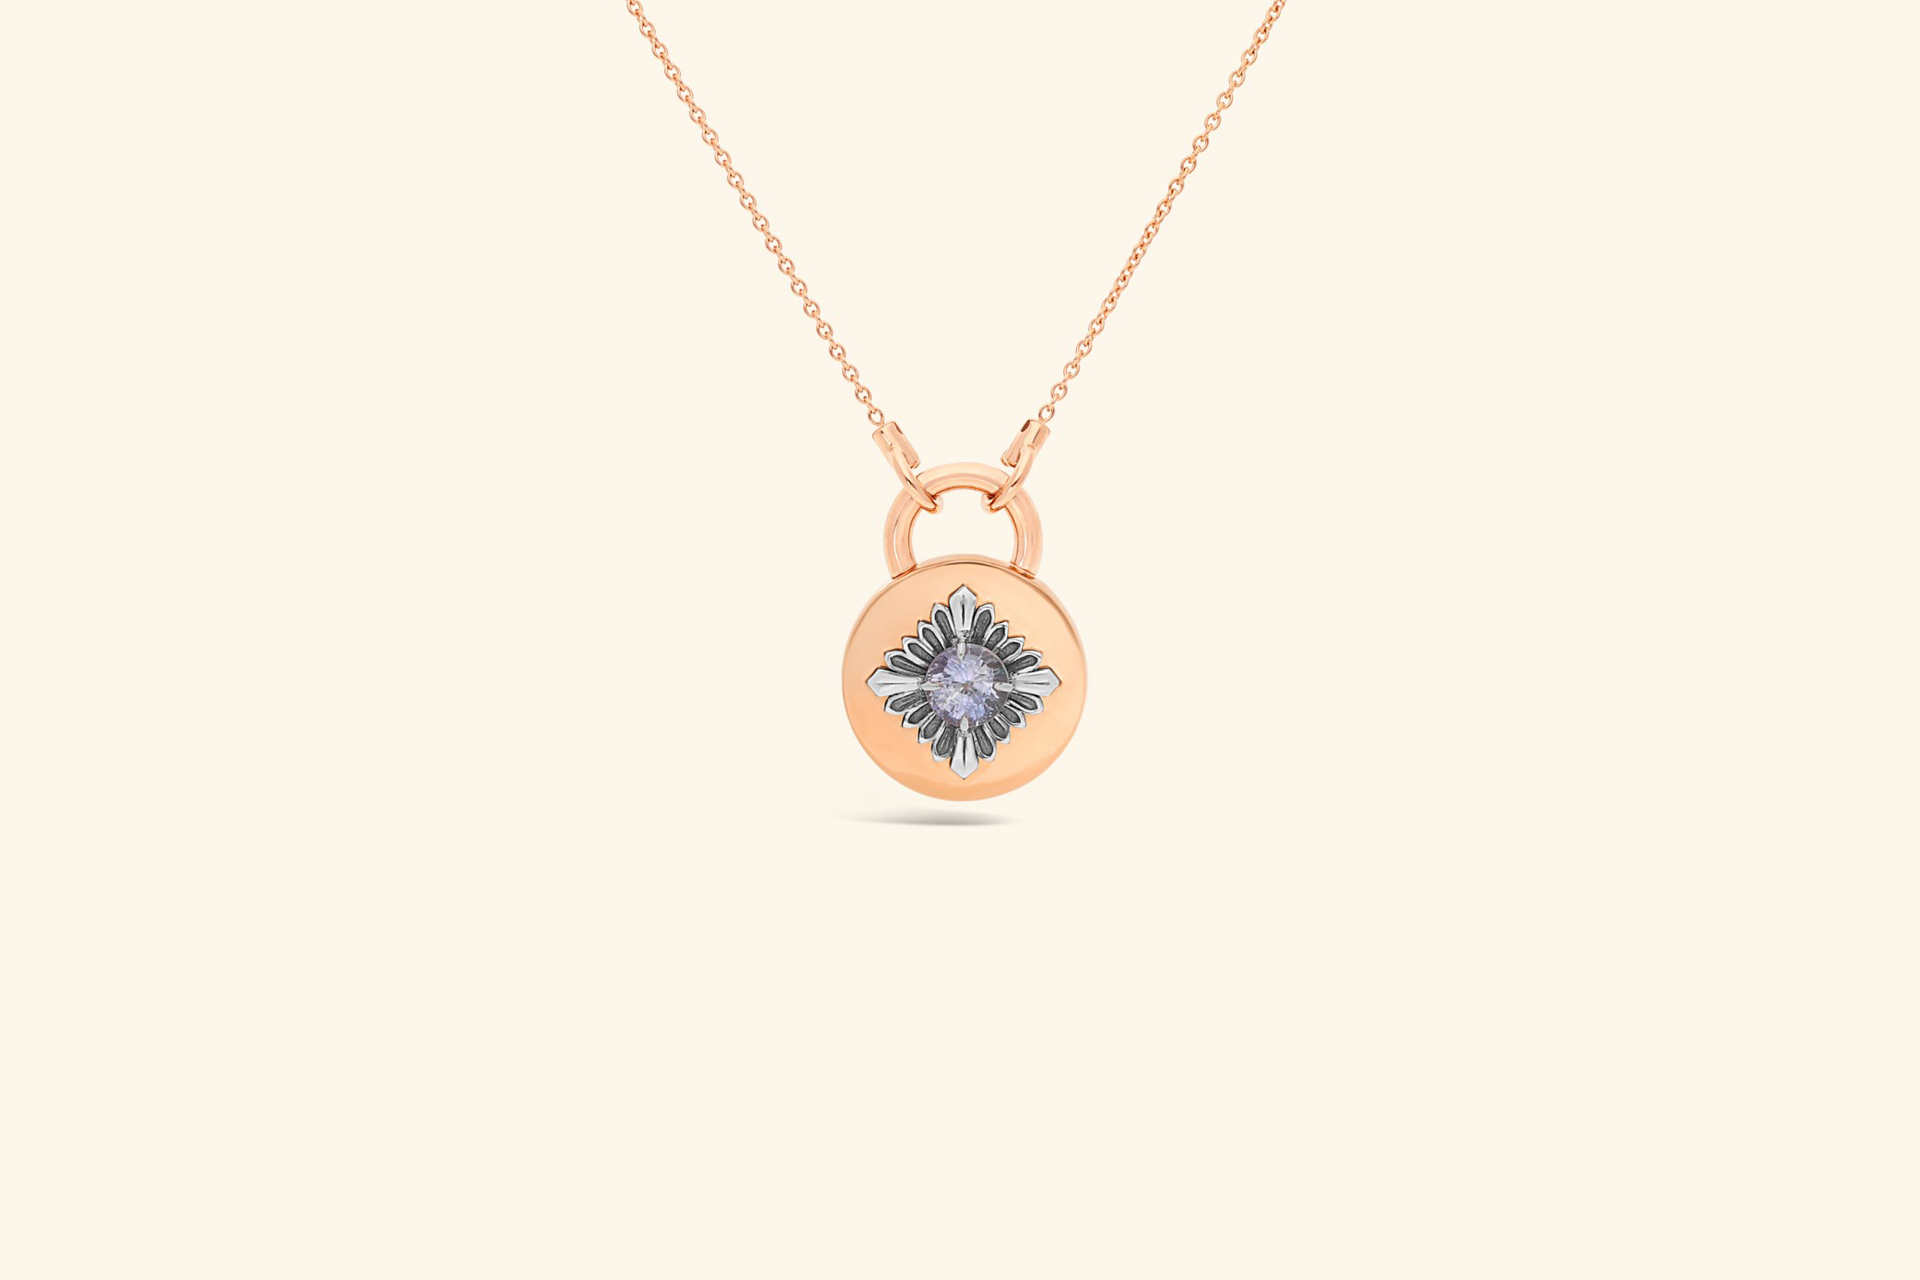 Jeton necklace, rose gold and blackened silver, mauve sapphire